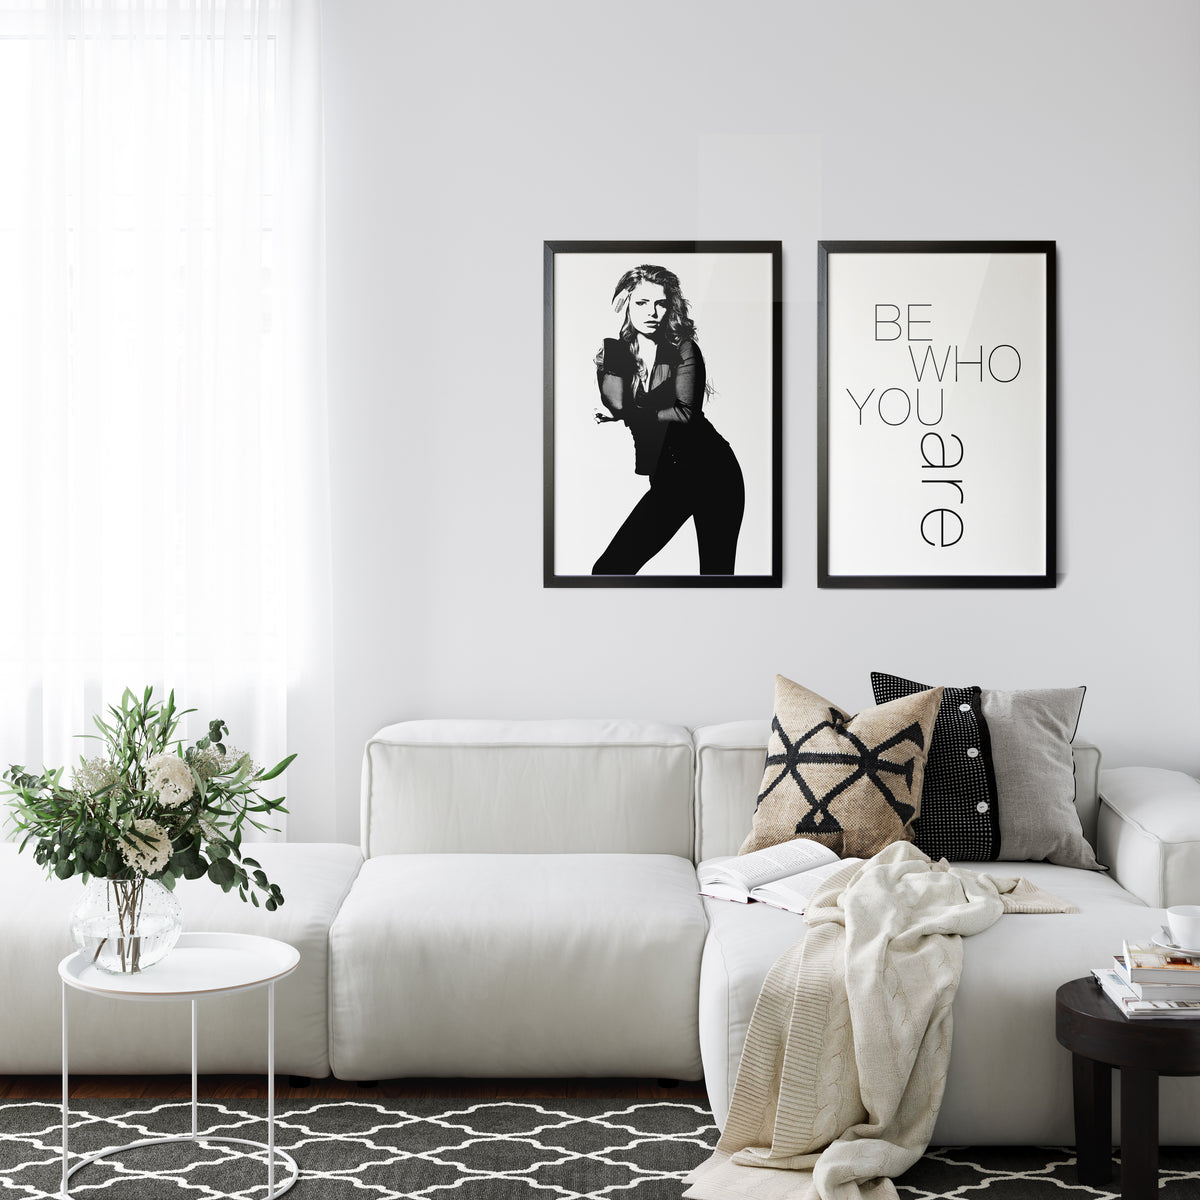 Livingroom with 2 framed images, one with girl in BW and one with words Be Who You Are